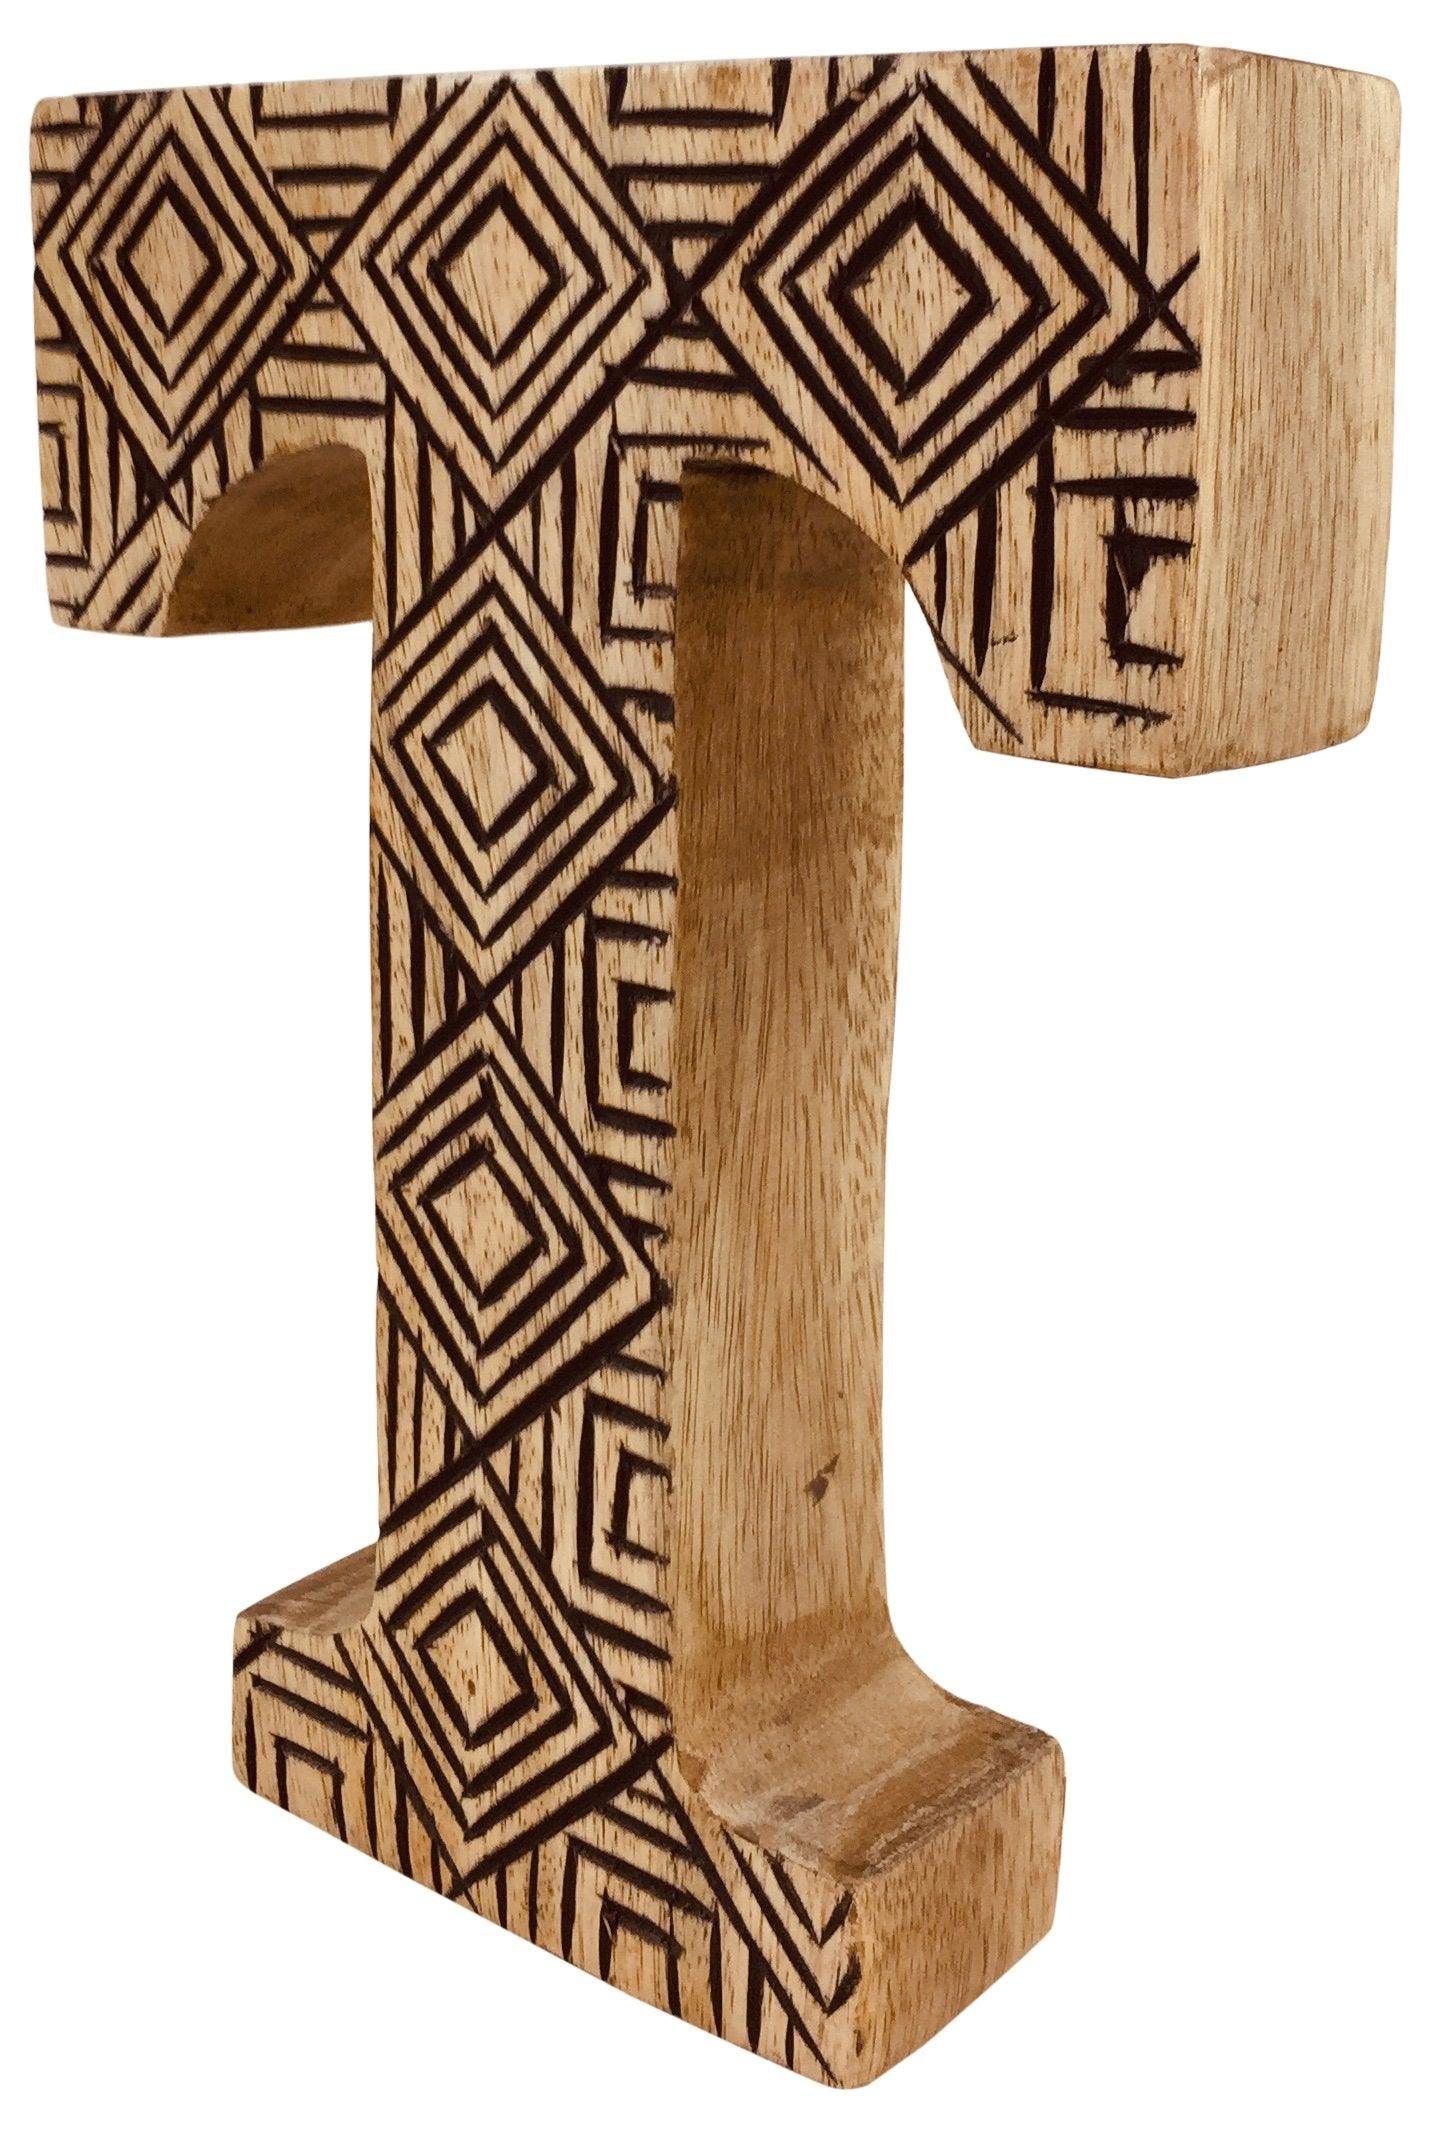 View Hand Carved Wooden Geometric Letter T information